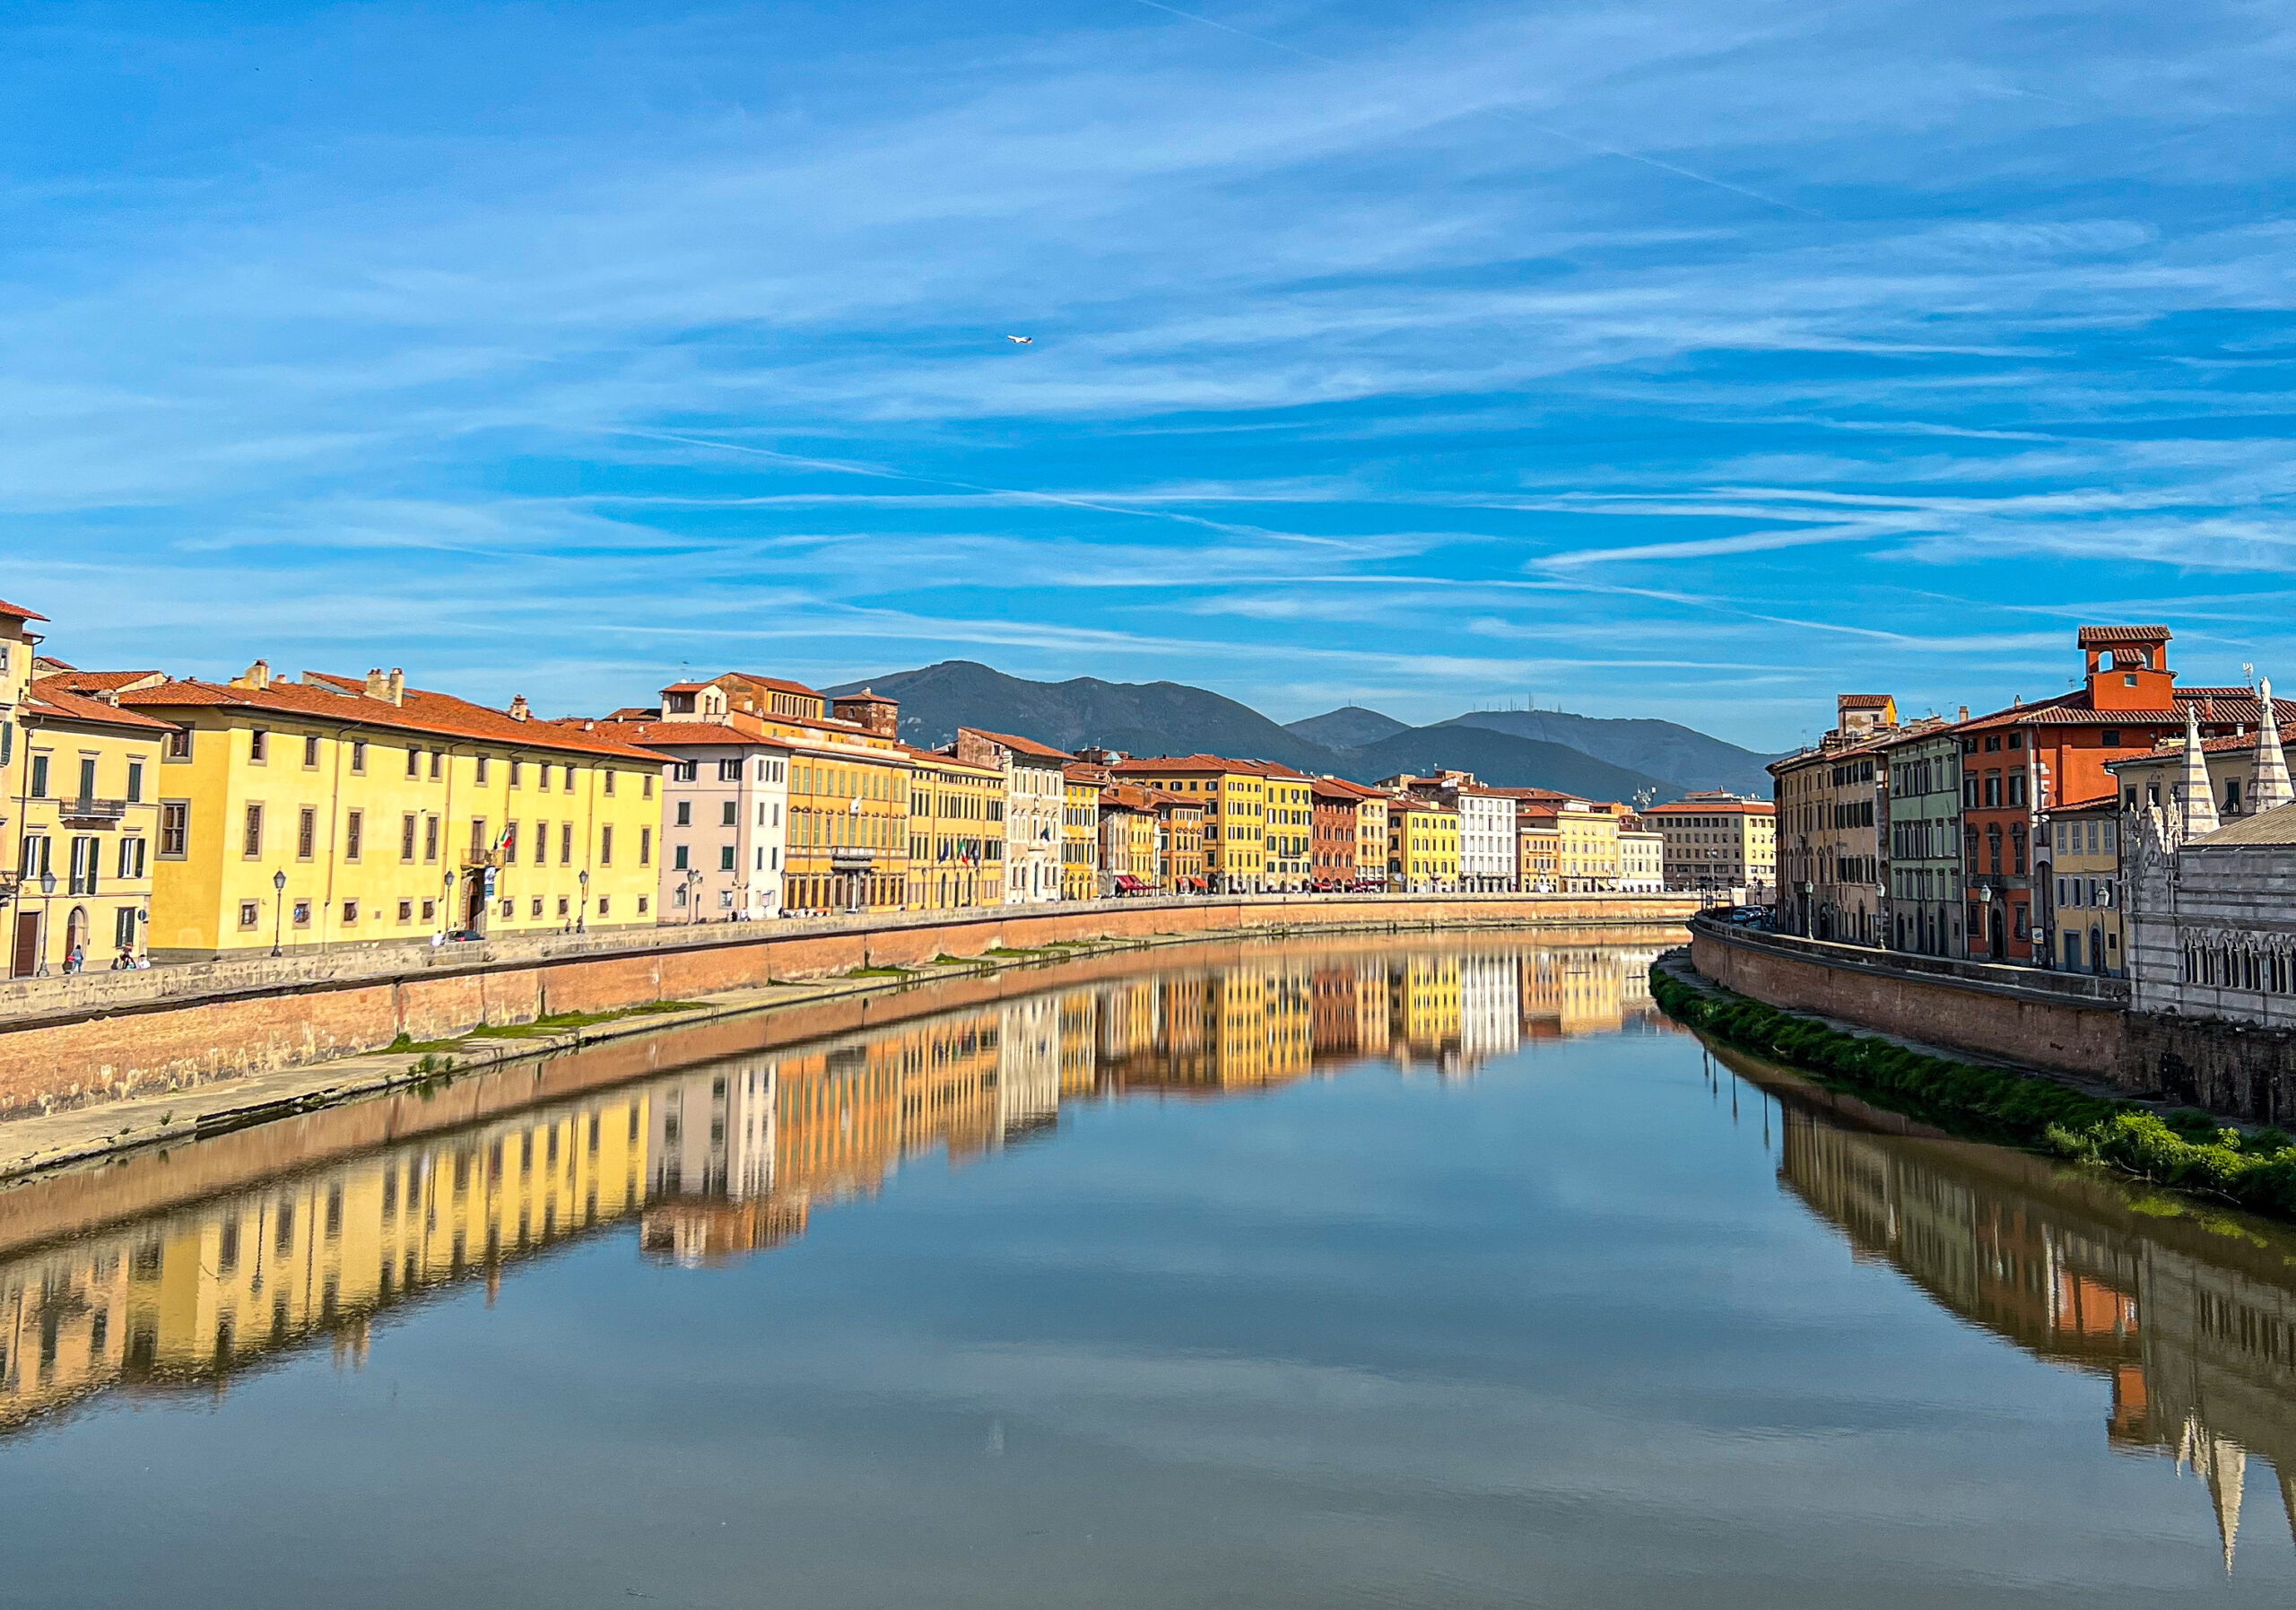 Pisa, Italy: How to Have a Gay Day 7+ Ways